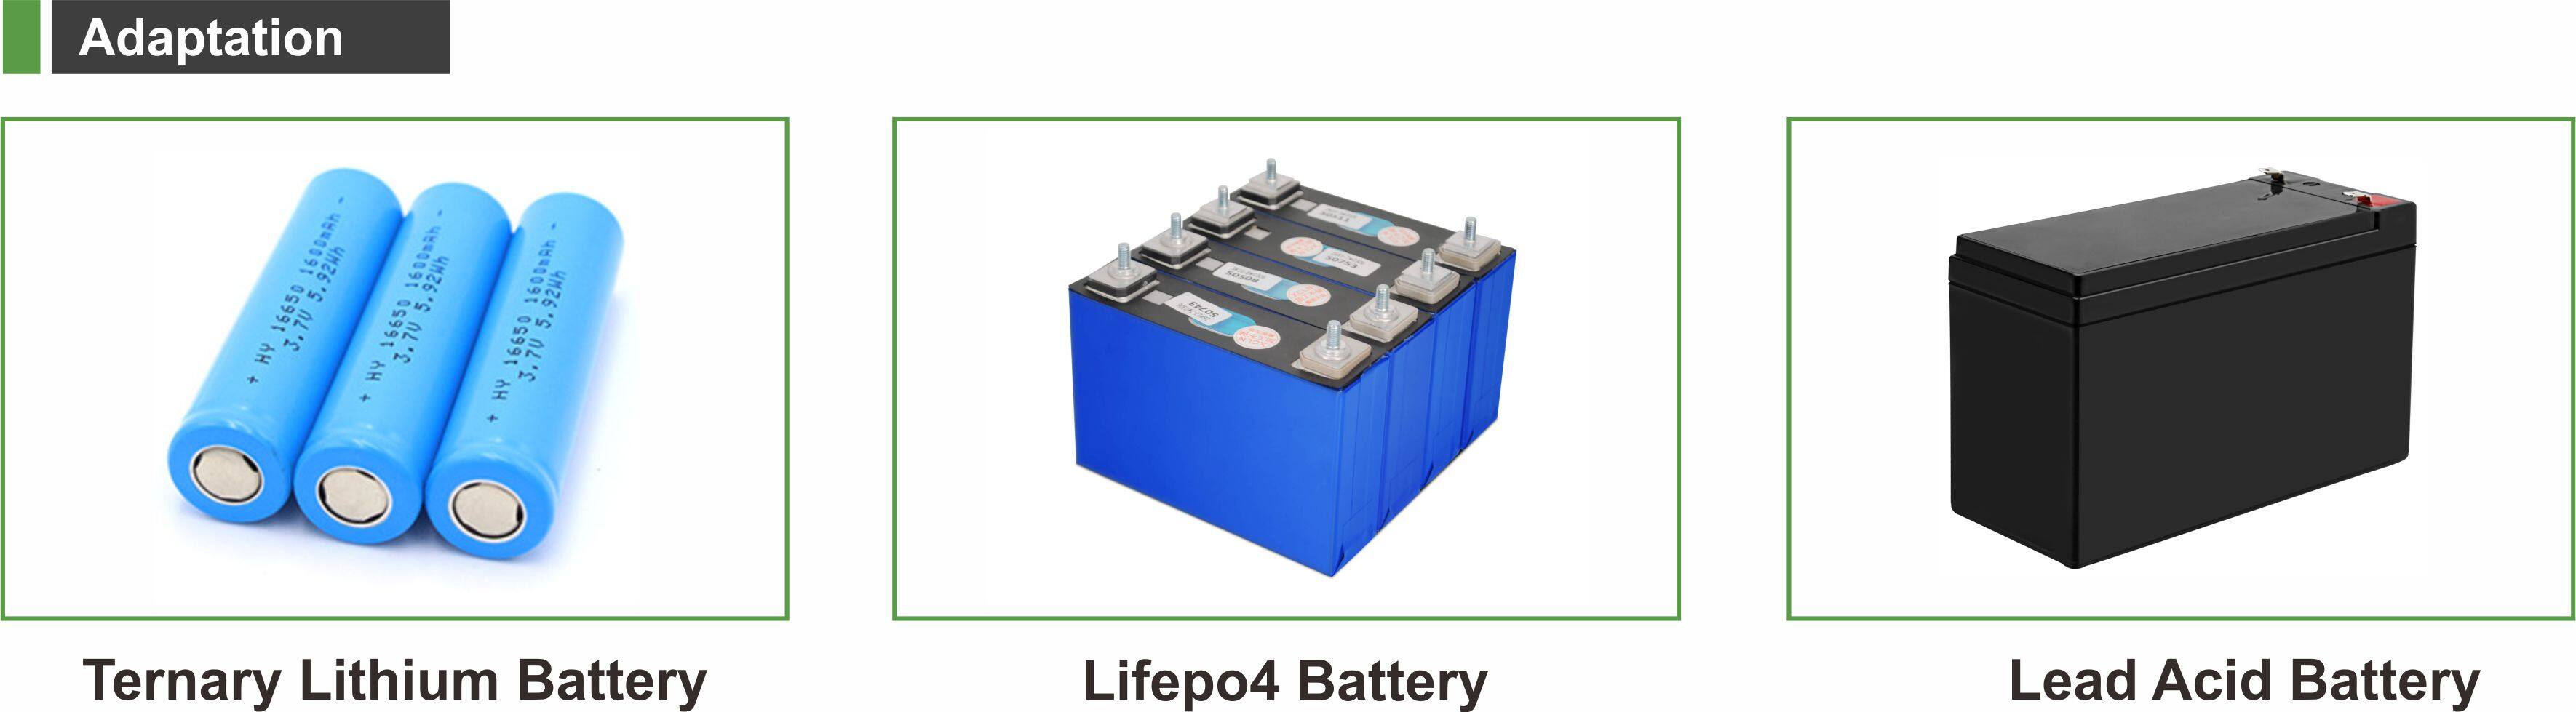 24v lithium ion battery and charger